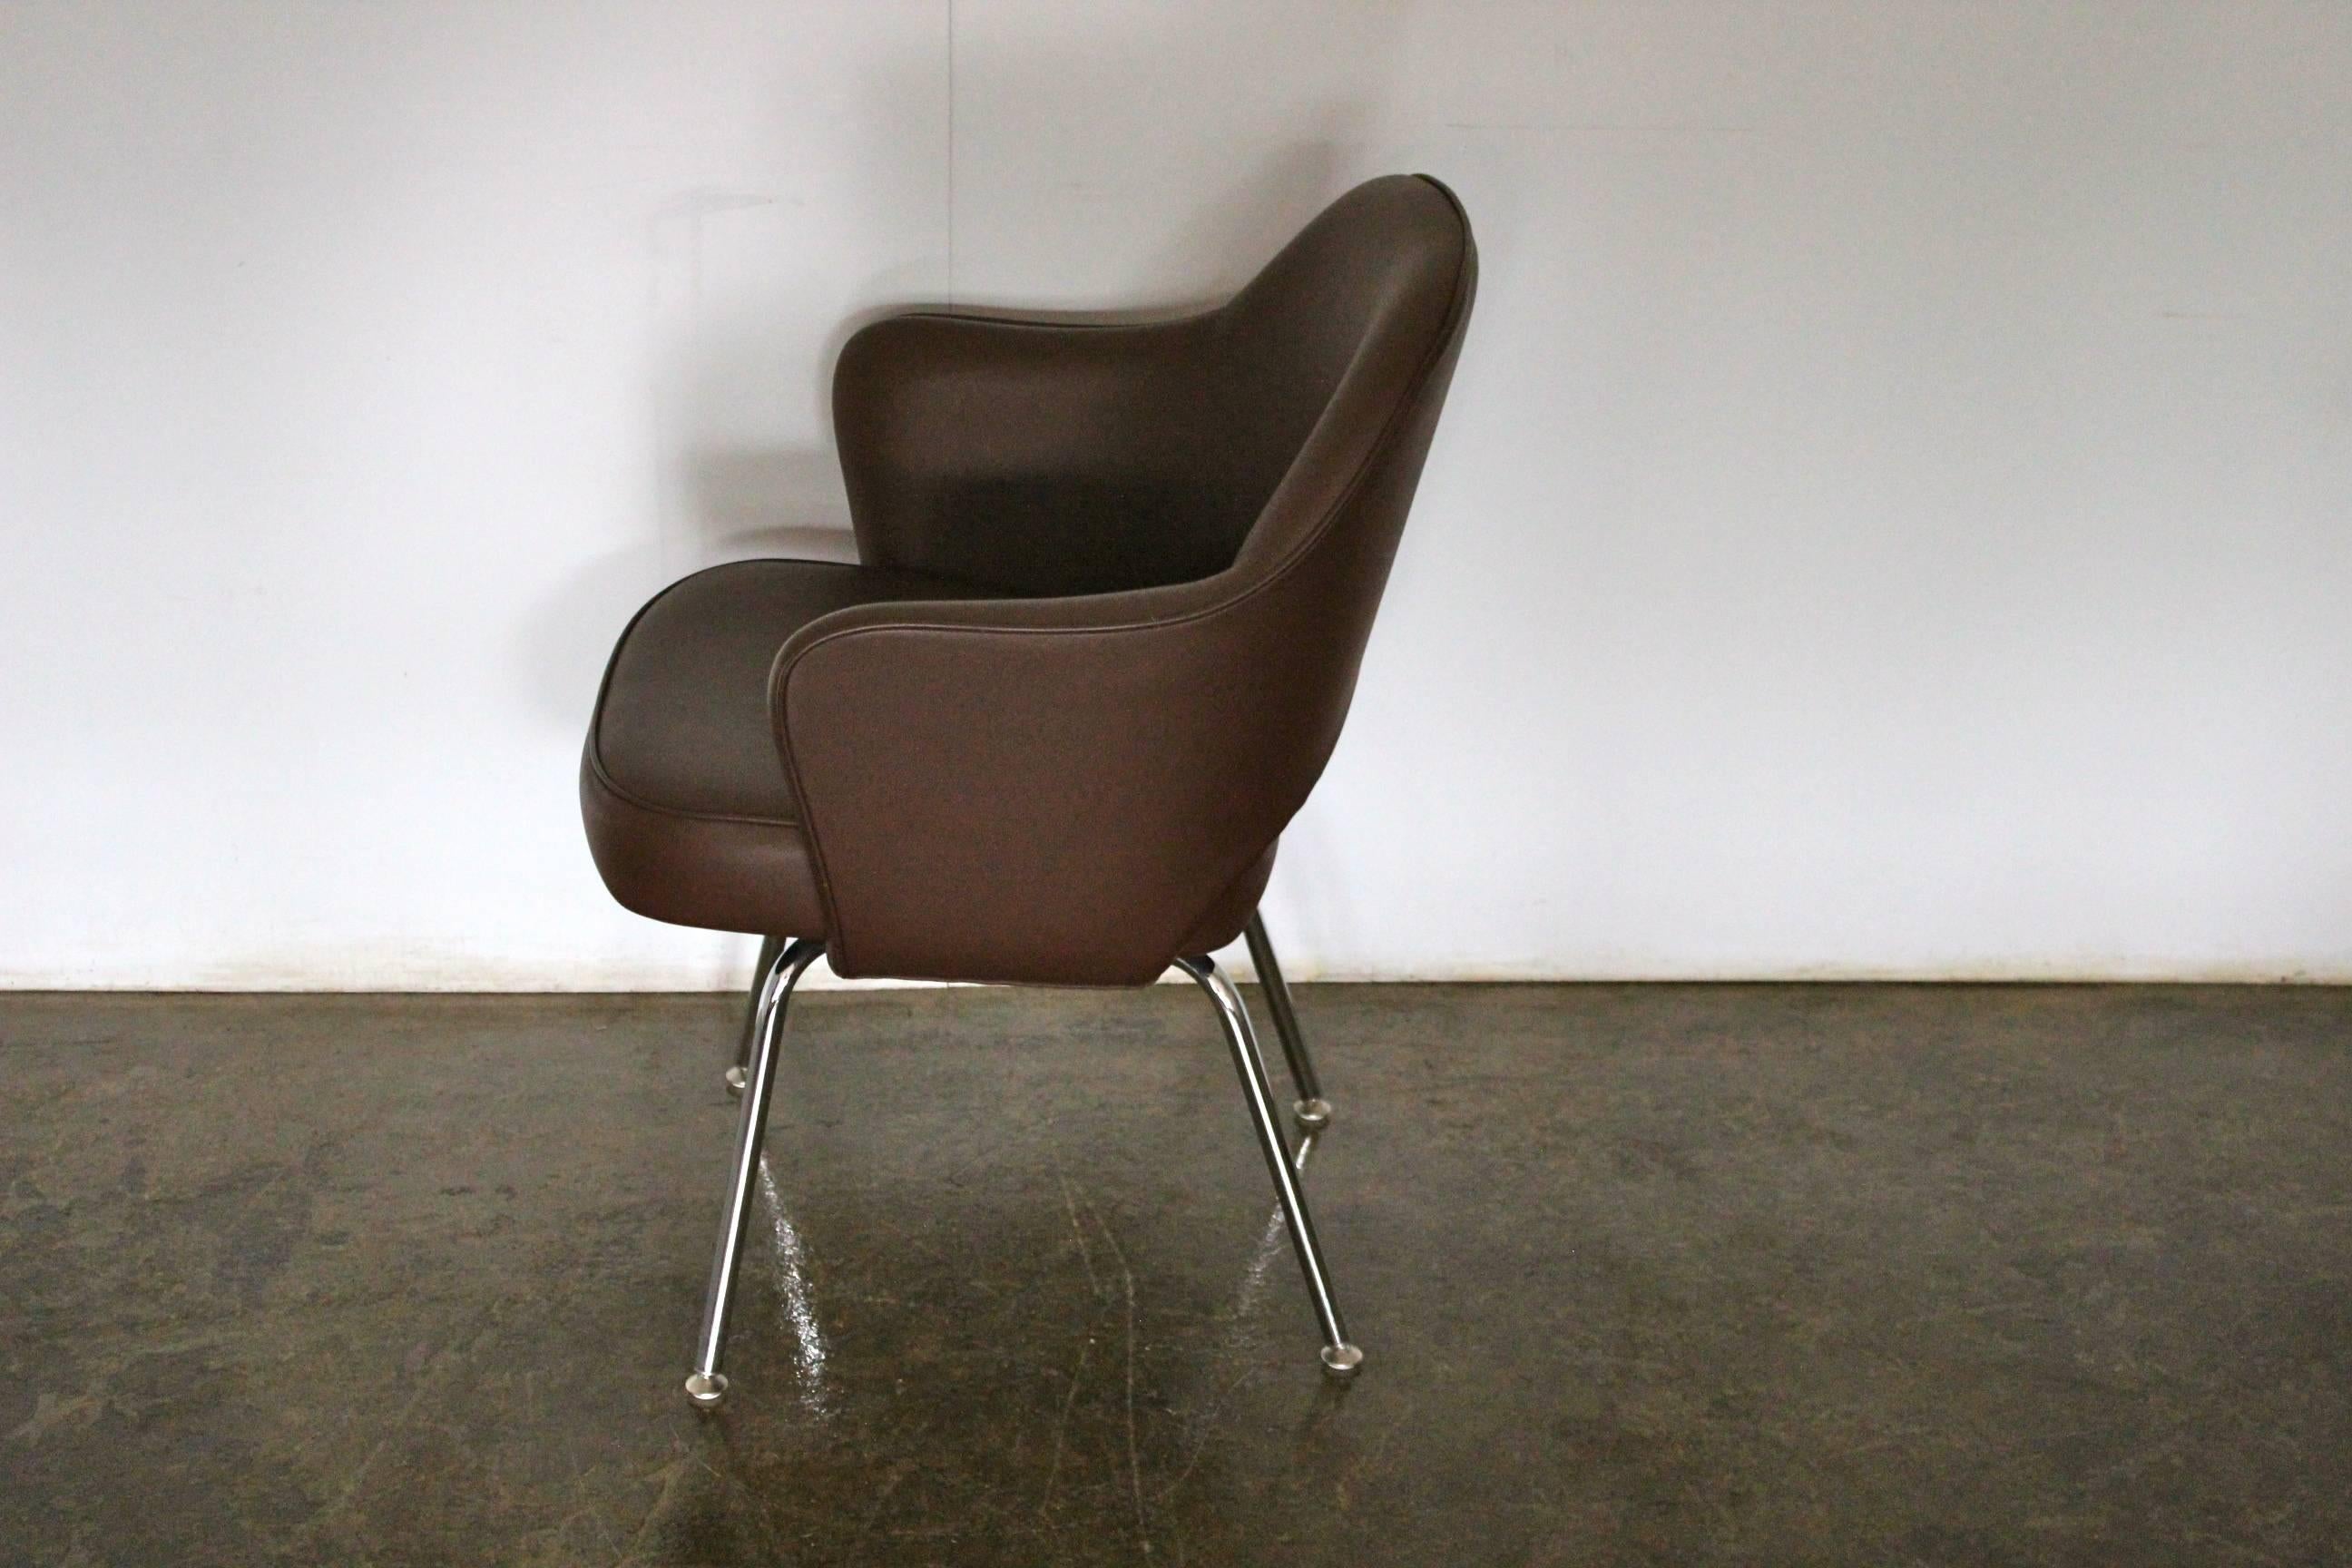 Hand-Crafted Knoll Studio “Saarinen Executive” Armchair in “Volo” Brown Leather For Sale